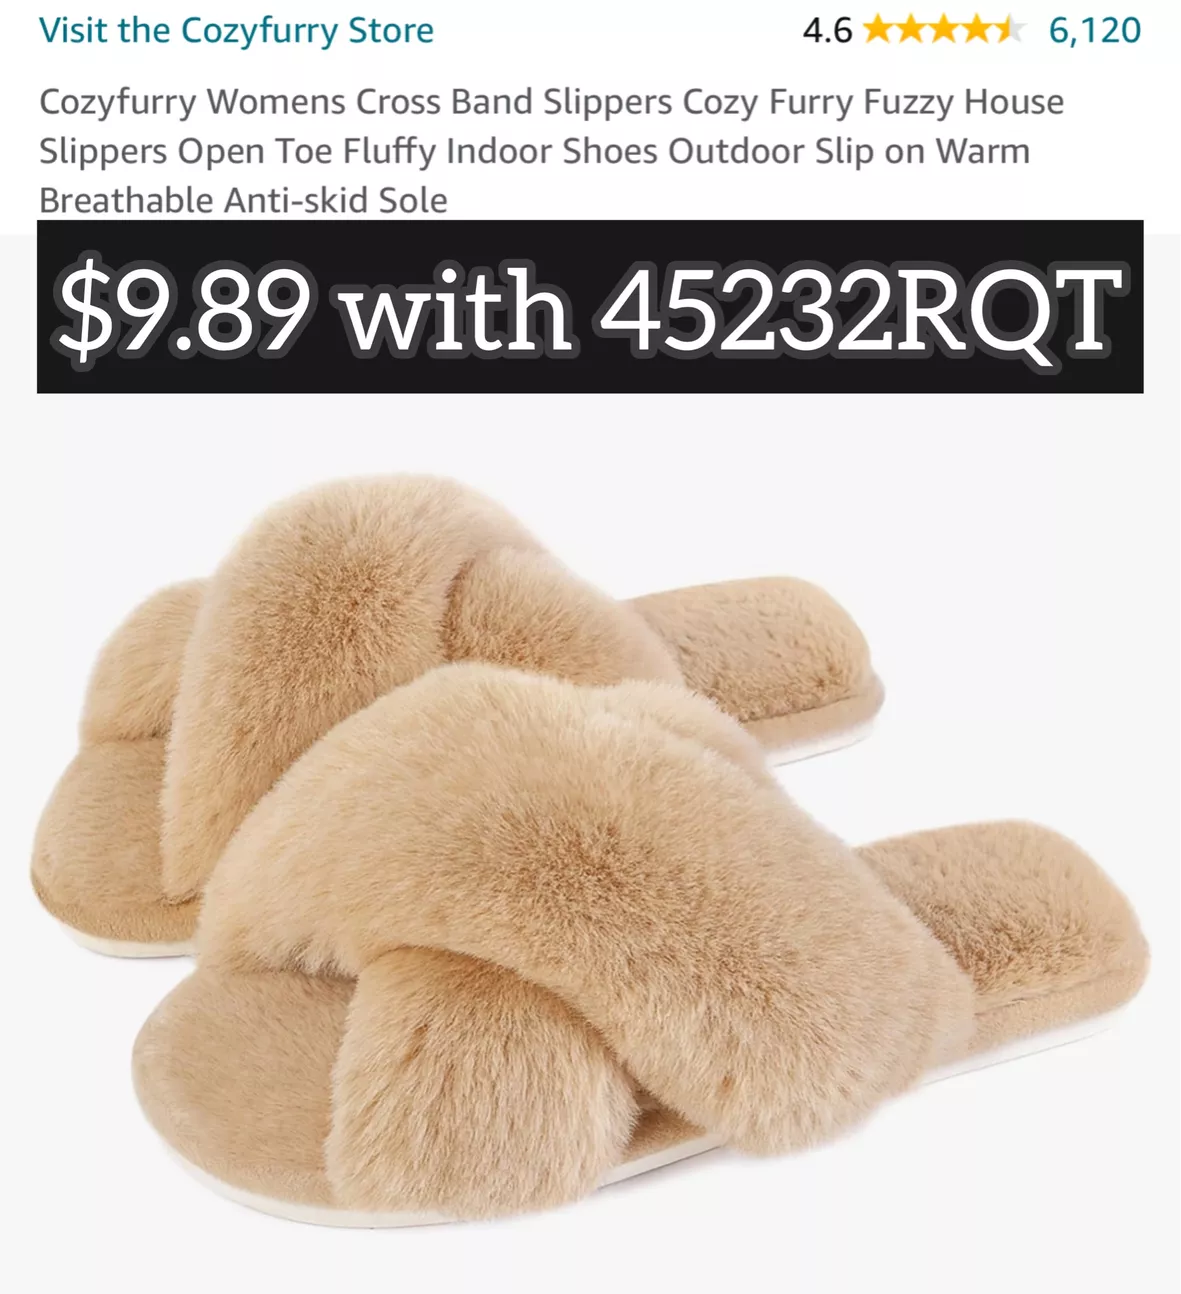 Cozyfurry Womens Cross Band Slippers Cozy Furry Fuzzy House Slippers Open  Toe Fluffy Indoor Shoes Outdoor Slip on Warm Breathable Anti-skid Sole